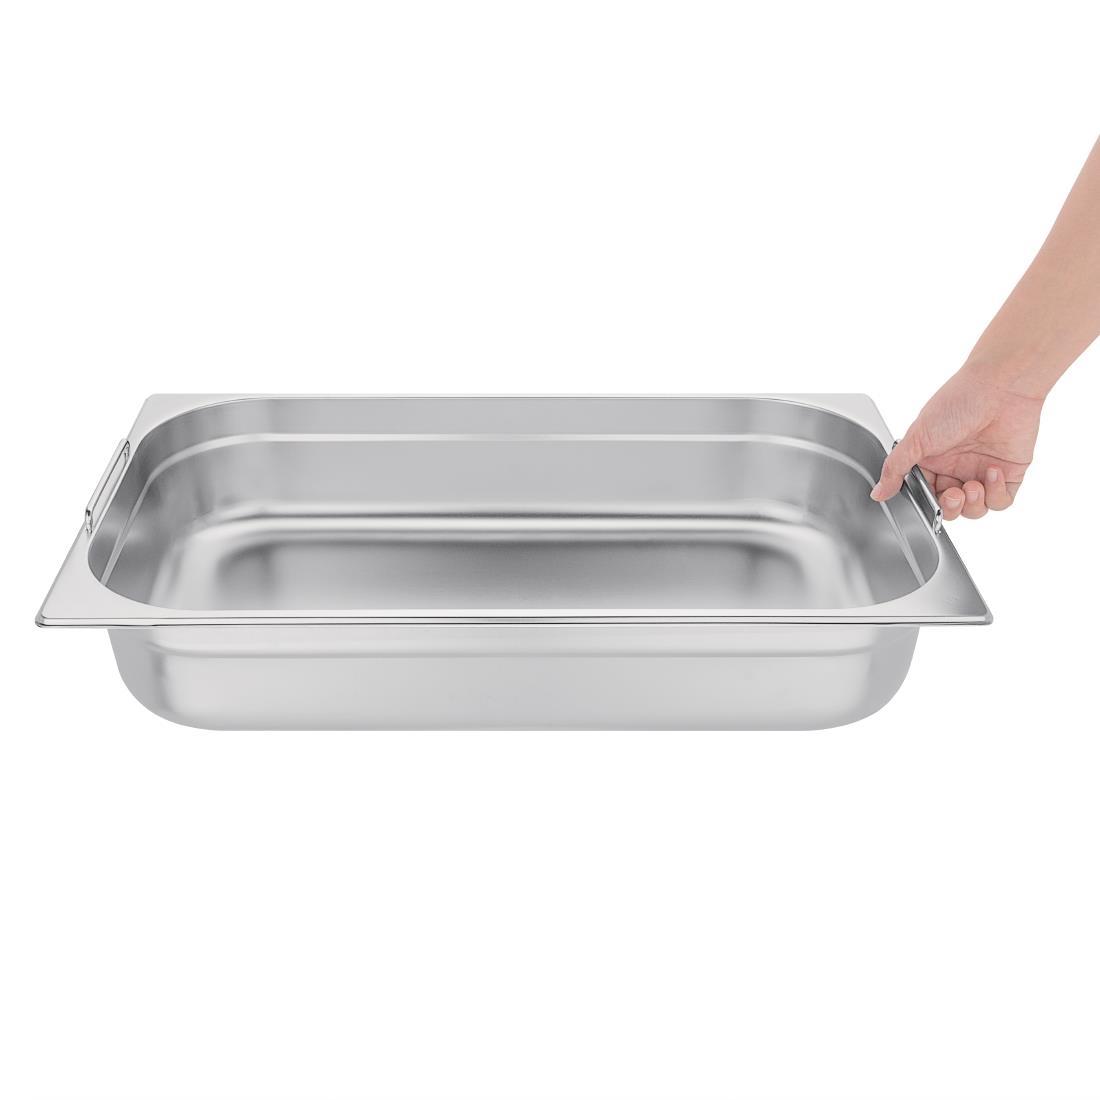 Vogue Stainless Steel 1/1 Gastronorm Pan With Handles 100mm - CB179  - 4